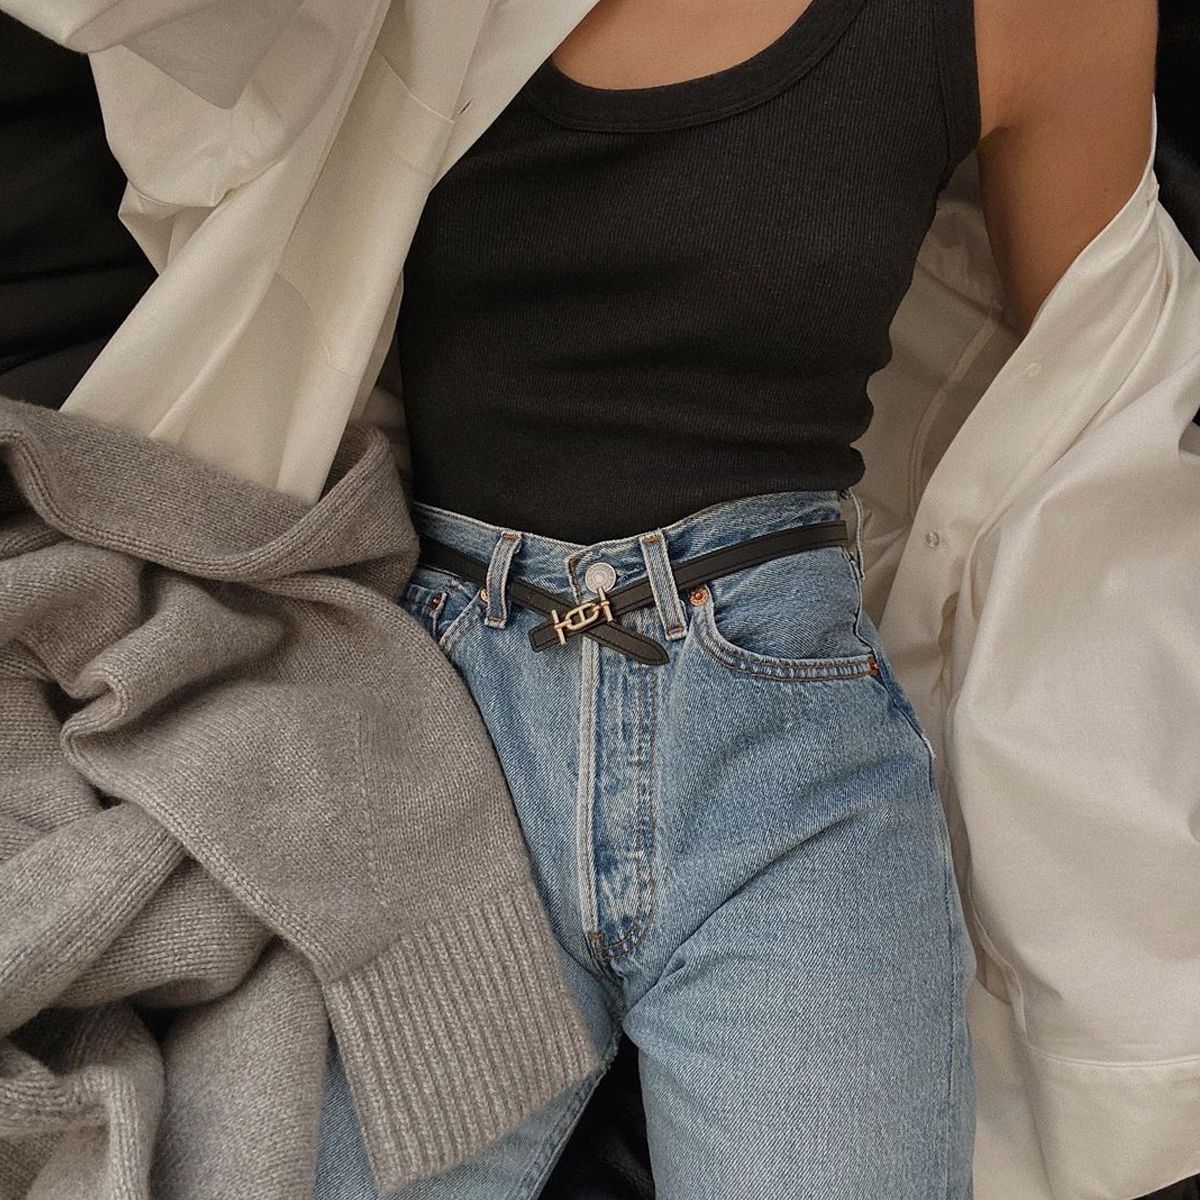 5 stylish jeans to add to your wardrobe - TODAY